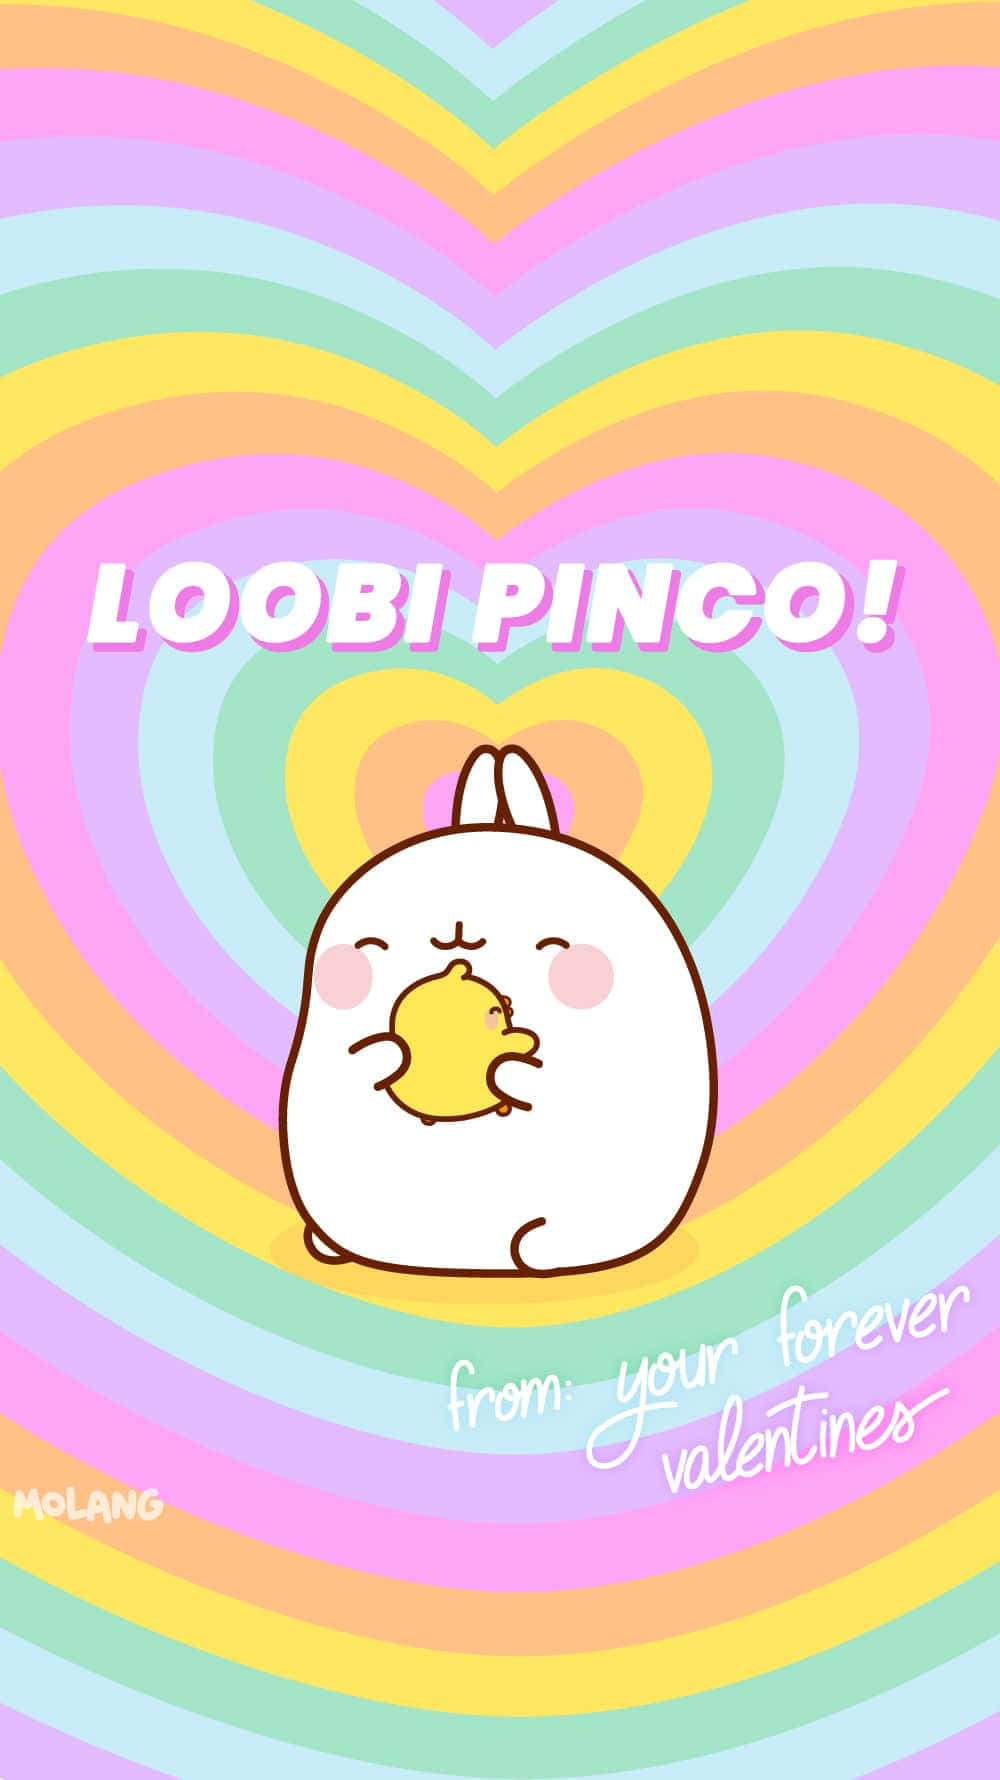 A Cute Bunny With The Words Lobi Pinco From Your Forever Valentine Wallpaper